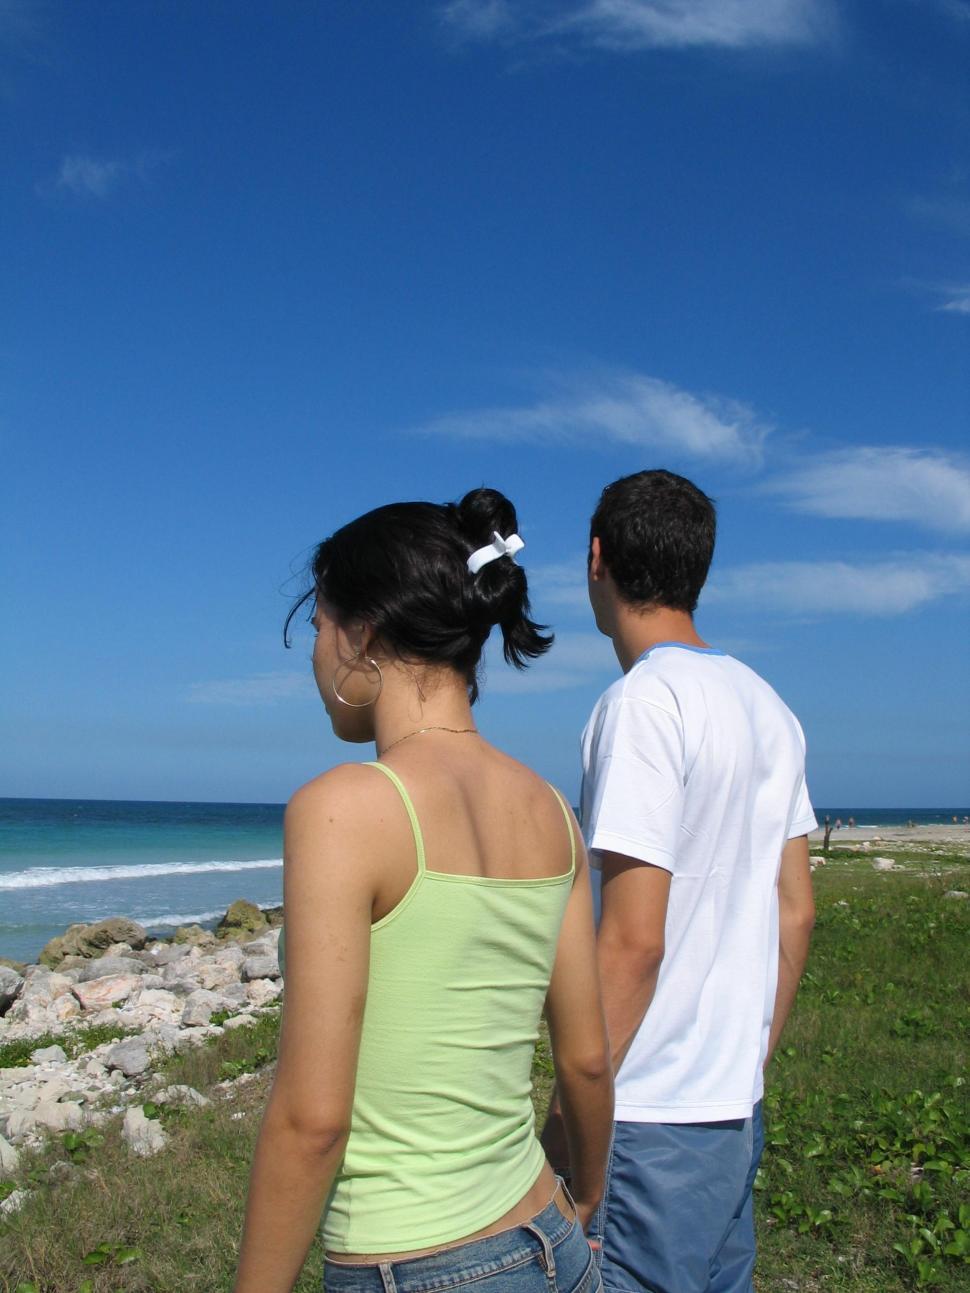 Free Image of Young Couple at Beach 